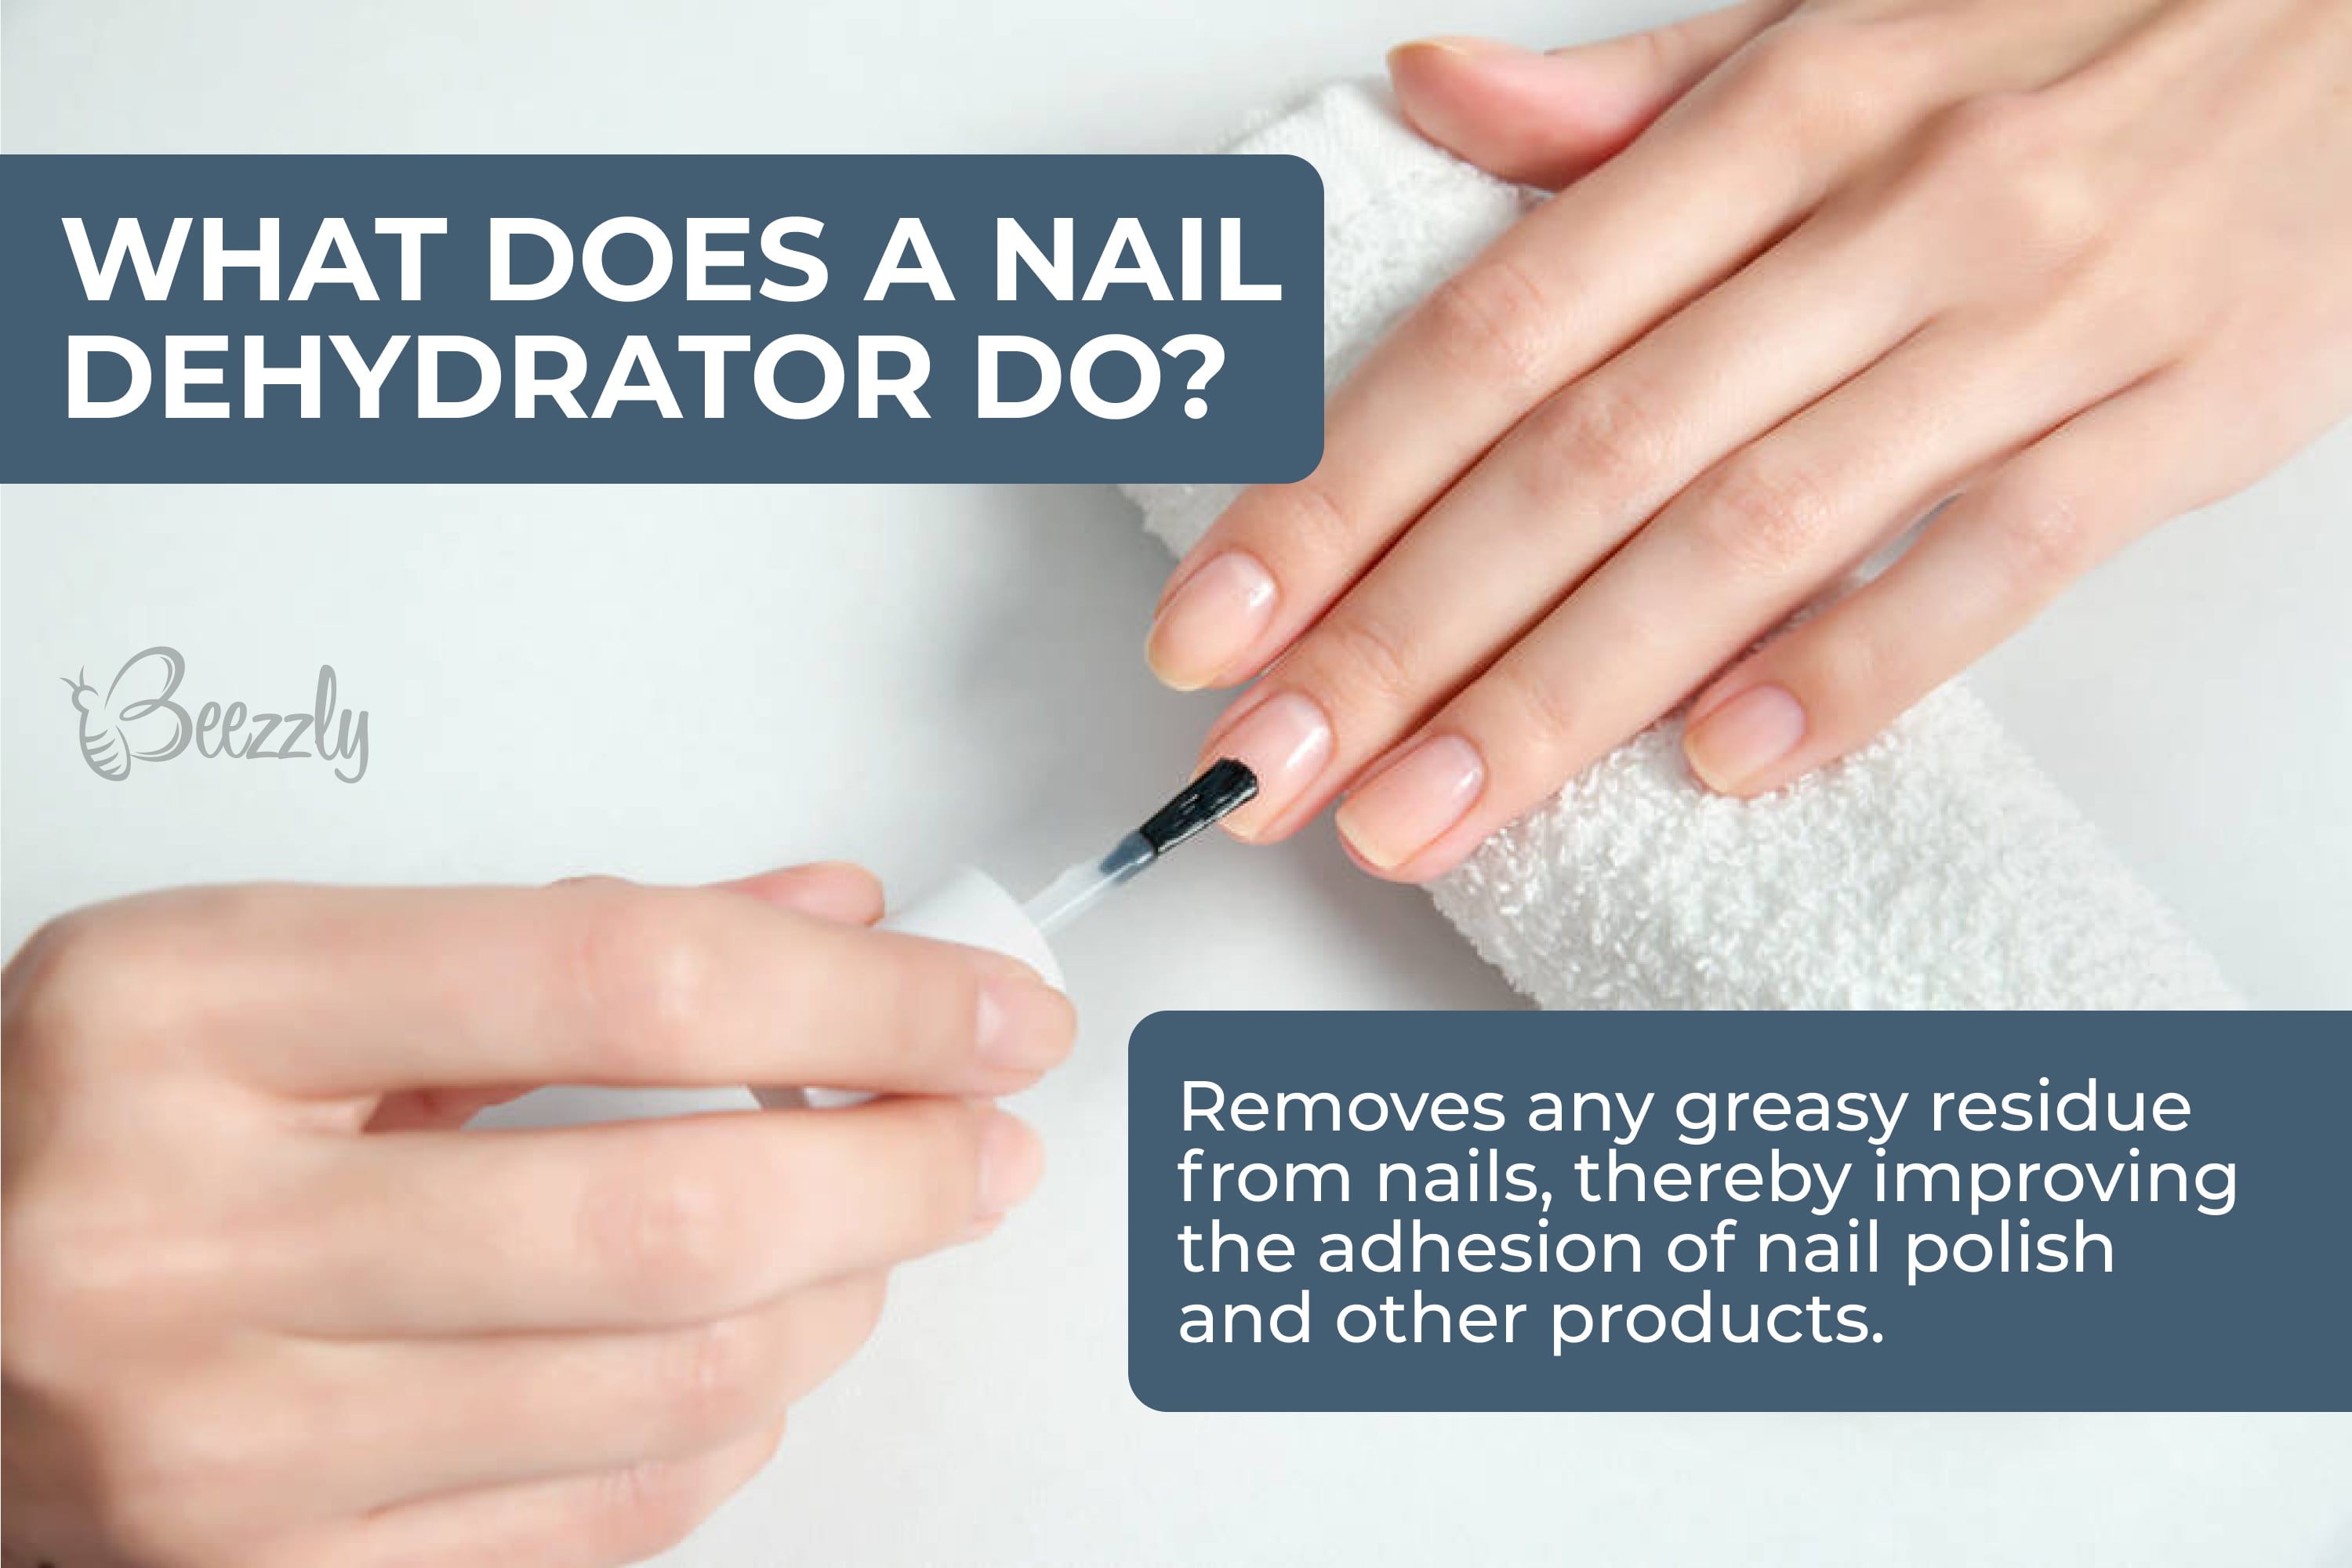 What does a nail dehydrator do